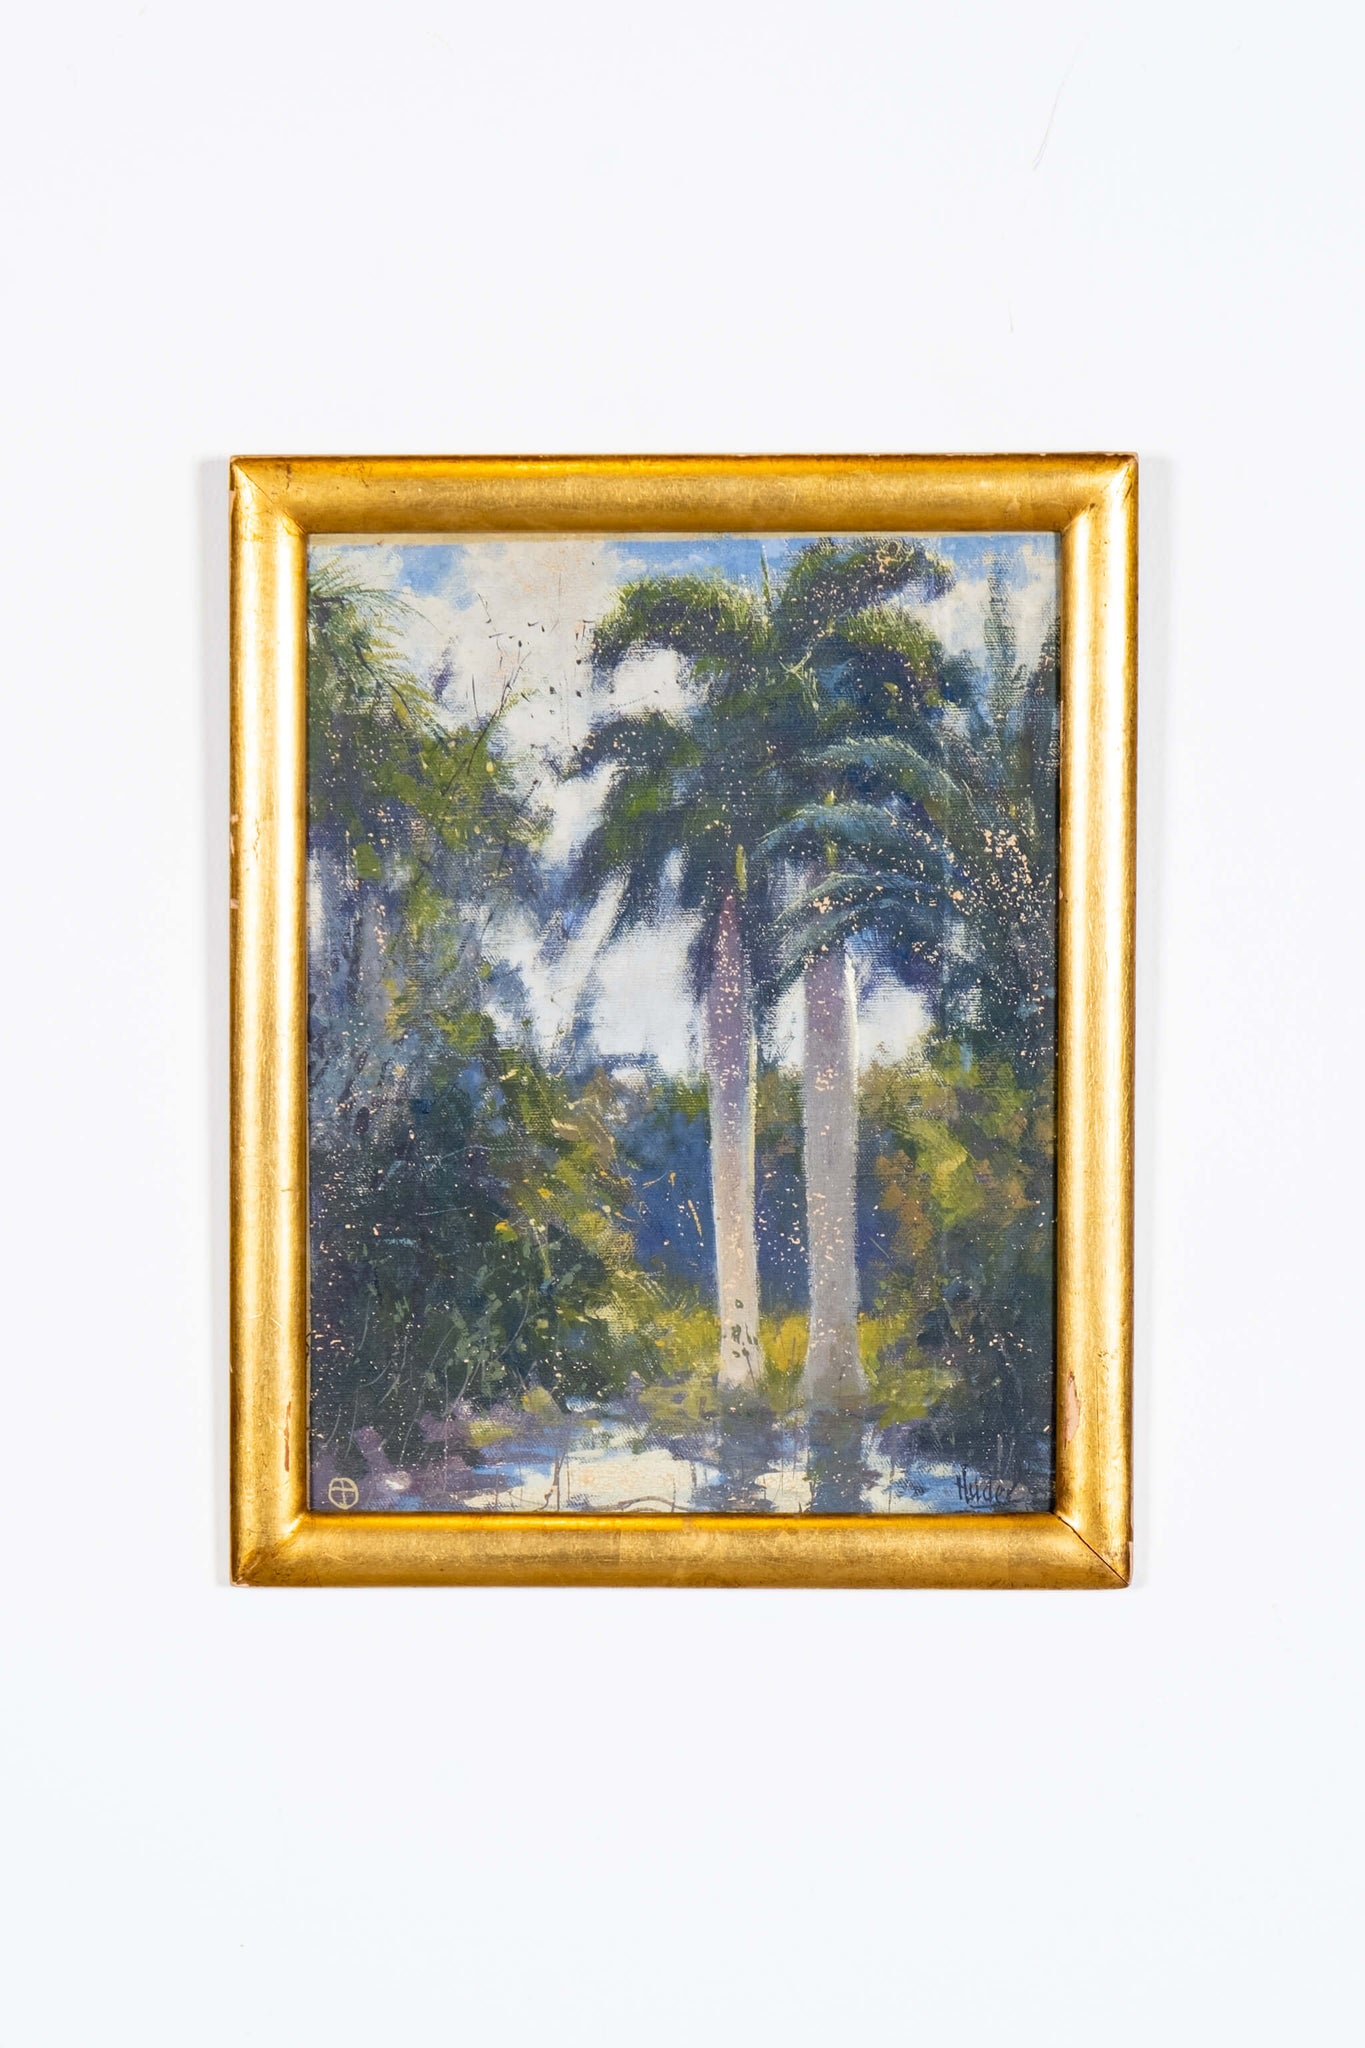 "Royal Palms", 1920s Oil Painting in Gold Frame